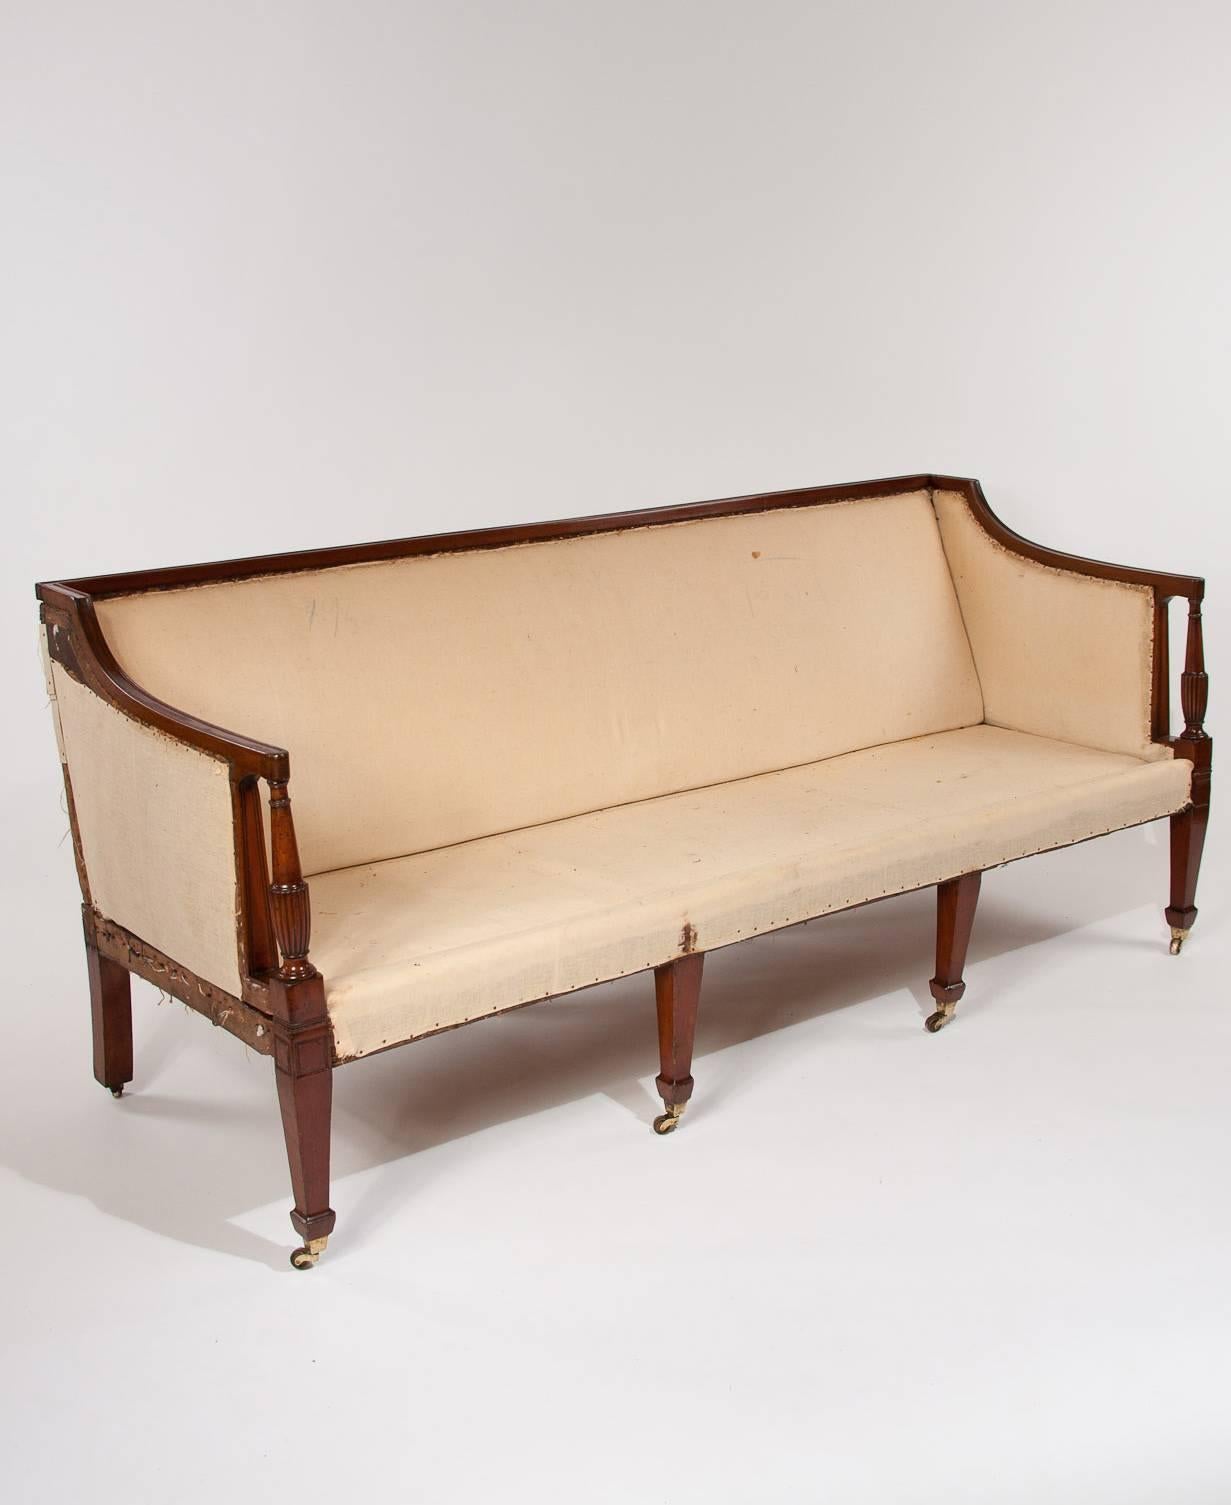 Quality Eight Leg Regency Three-Seat Settee In Excellent Condition In Benington, Herts